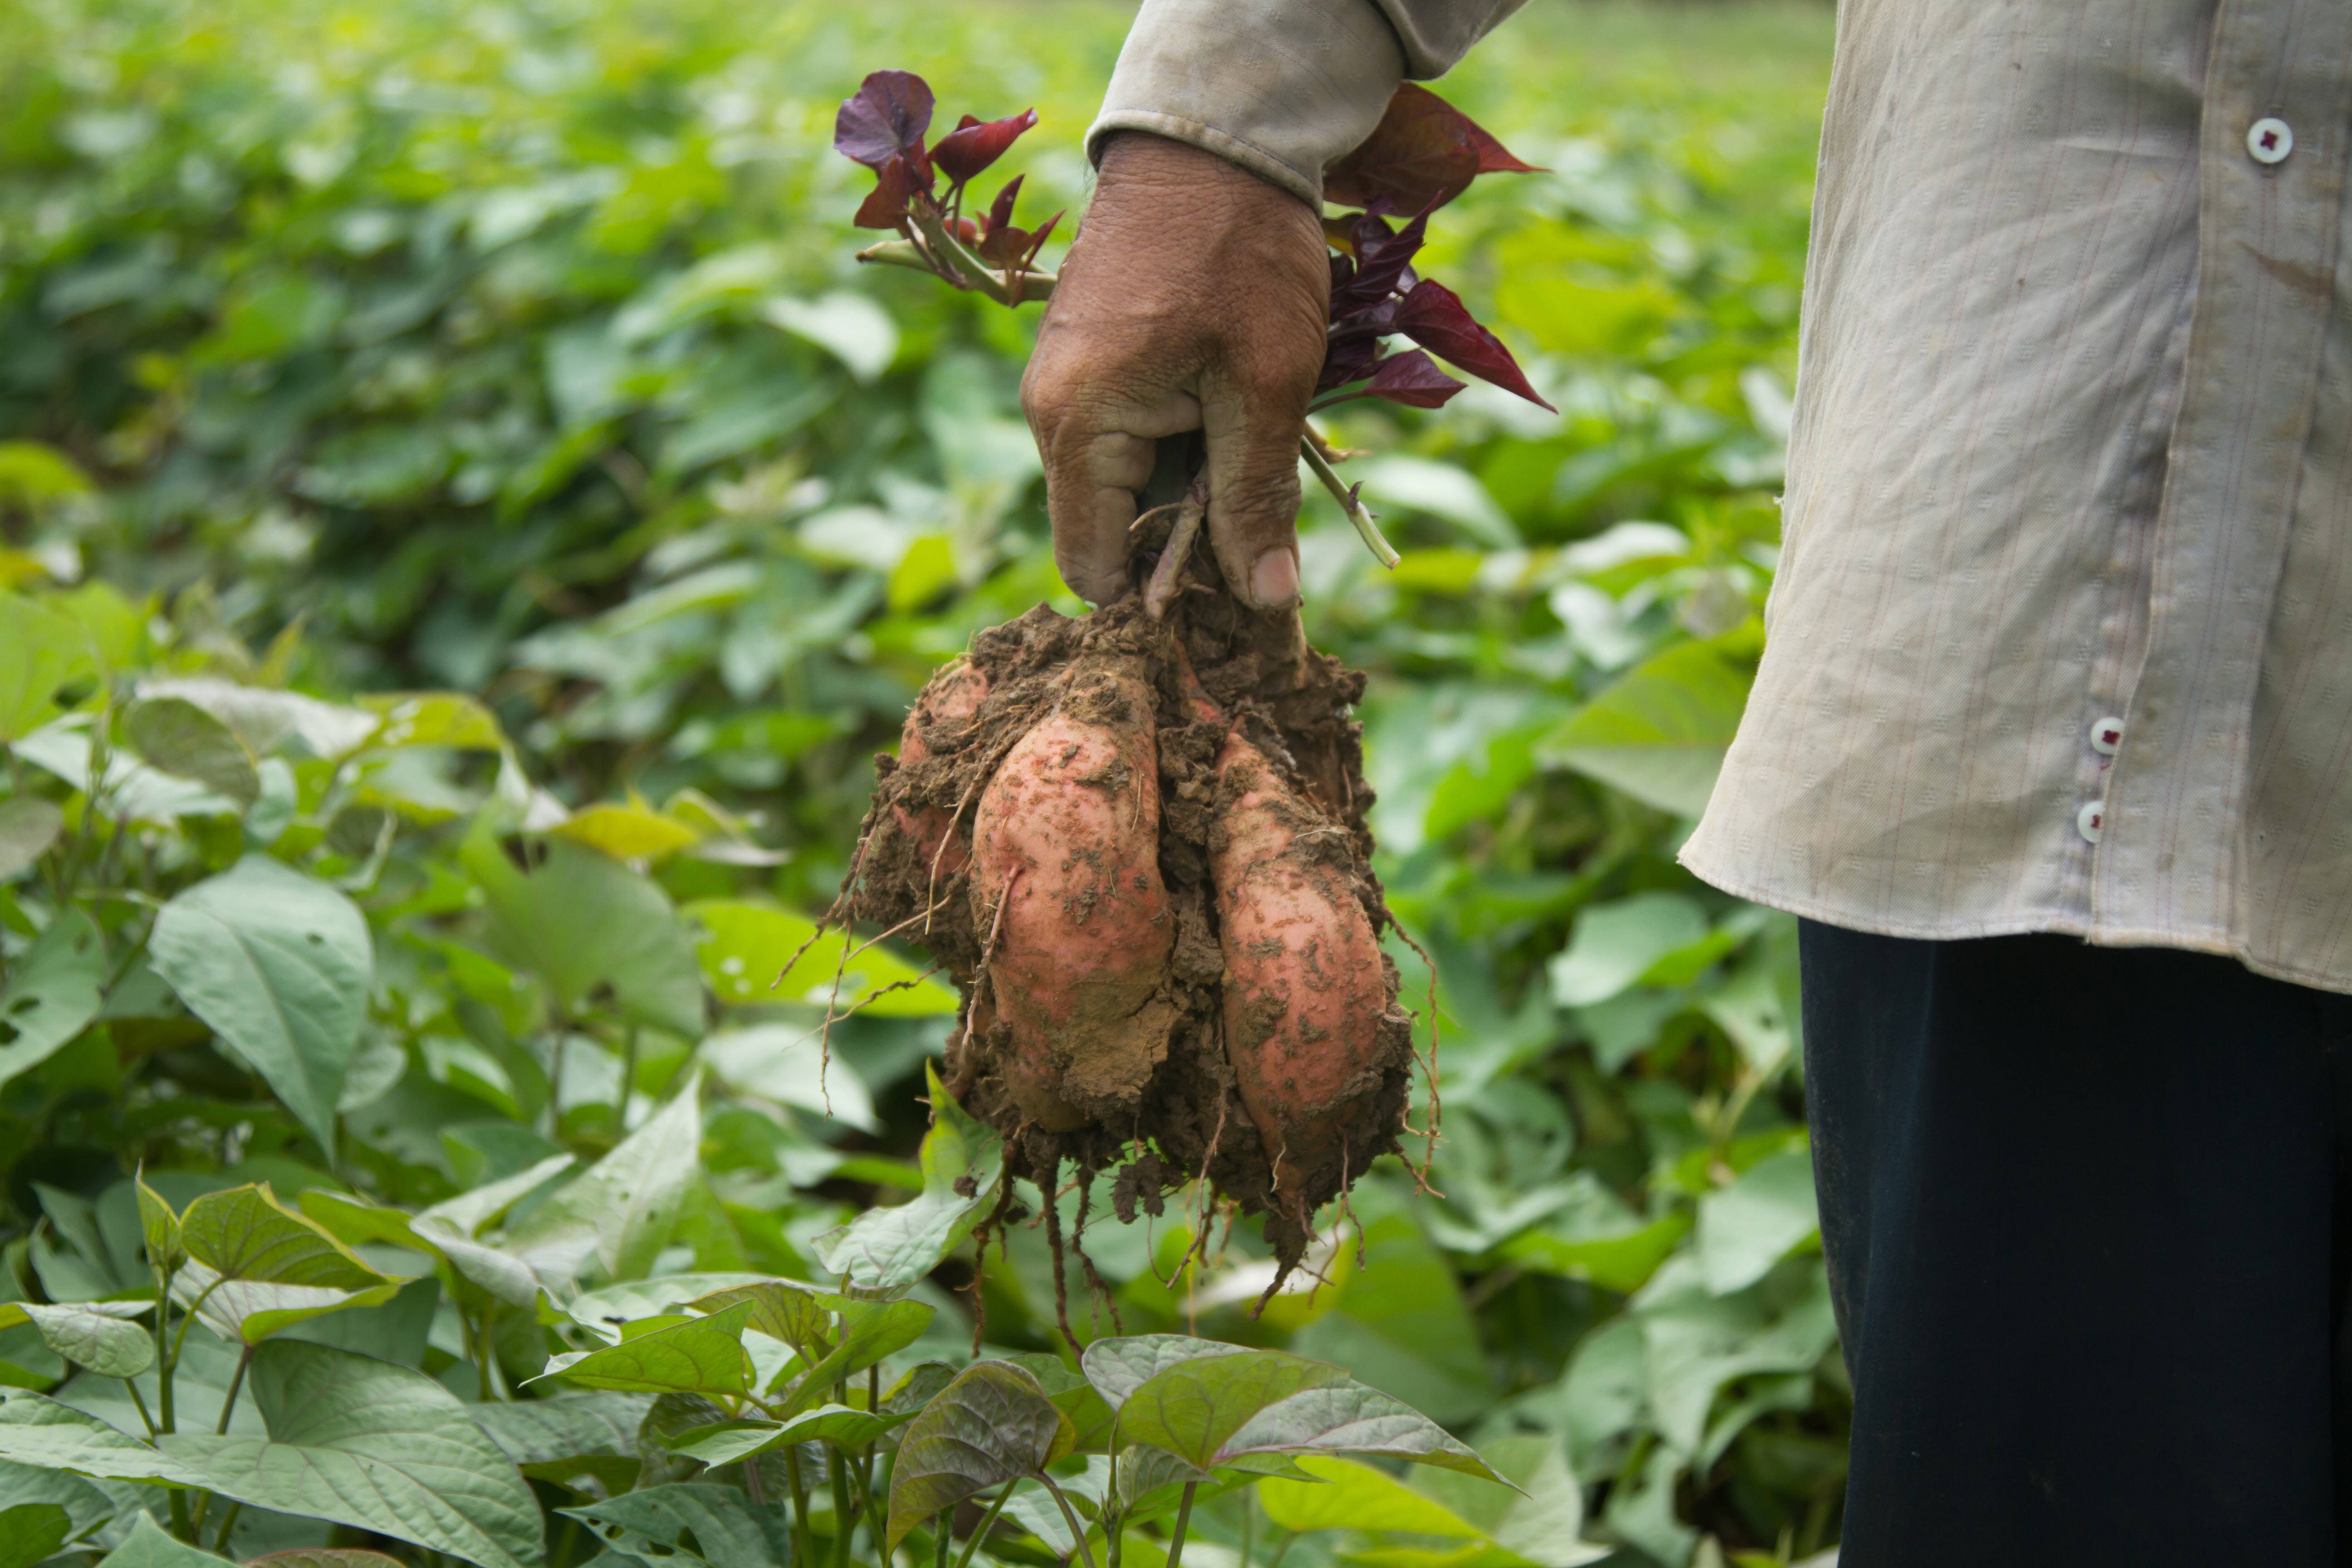 A person holding sweet potatoes in a field